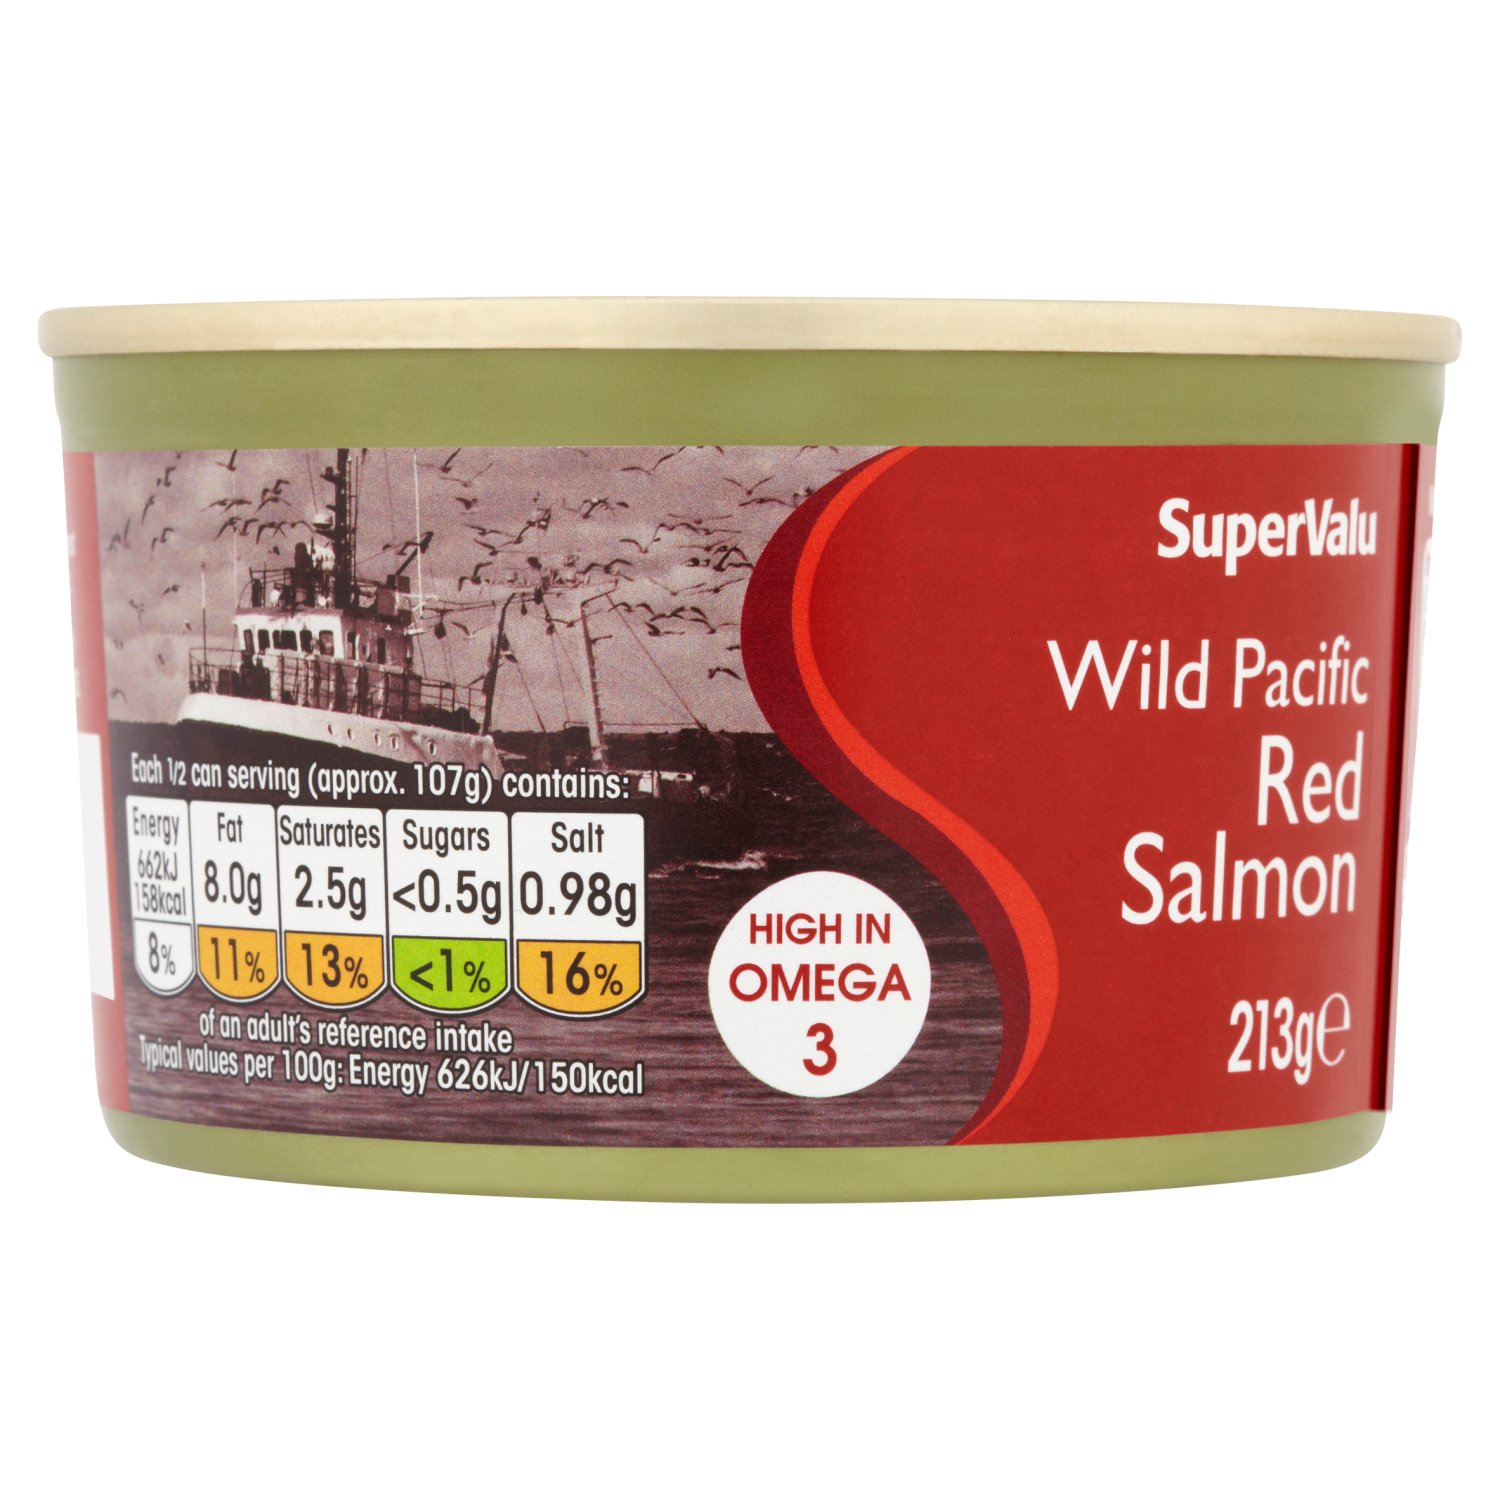 SuperValu Wild Pacific Red Salmon 213g